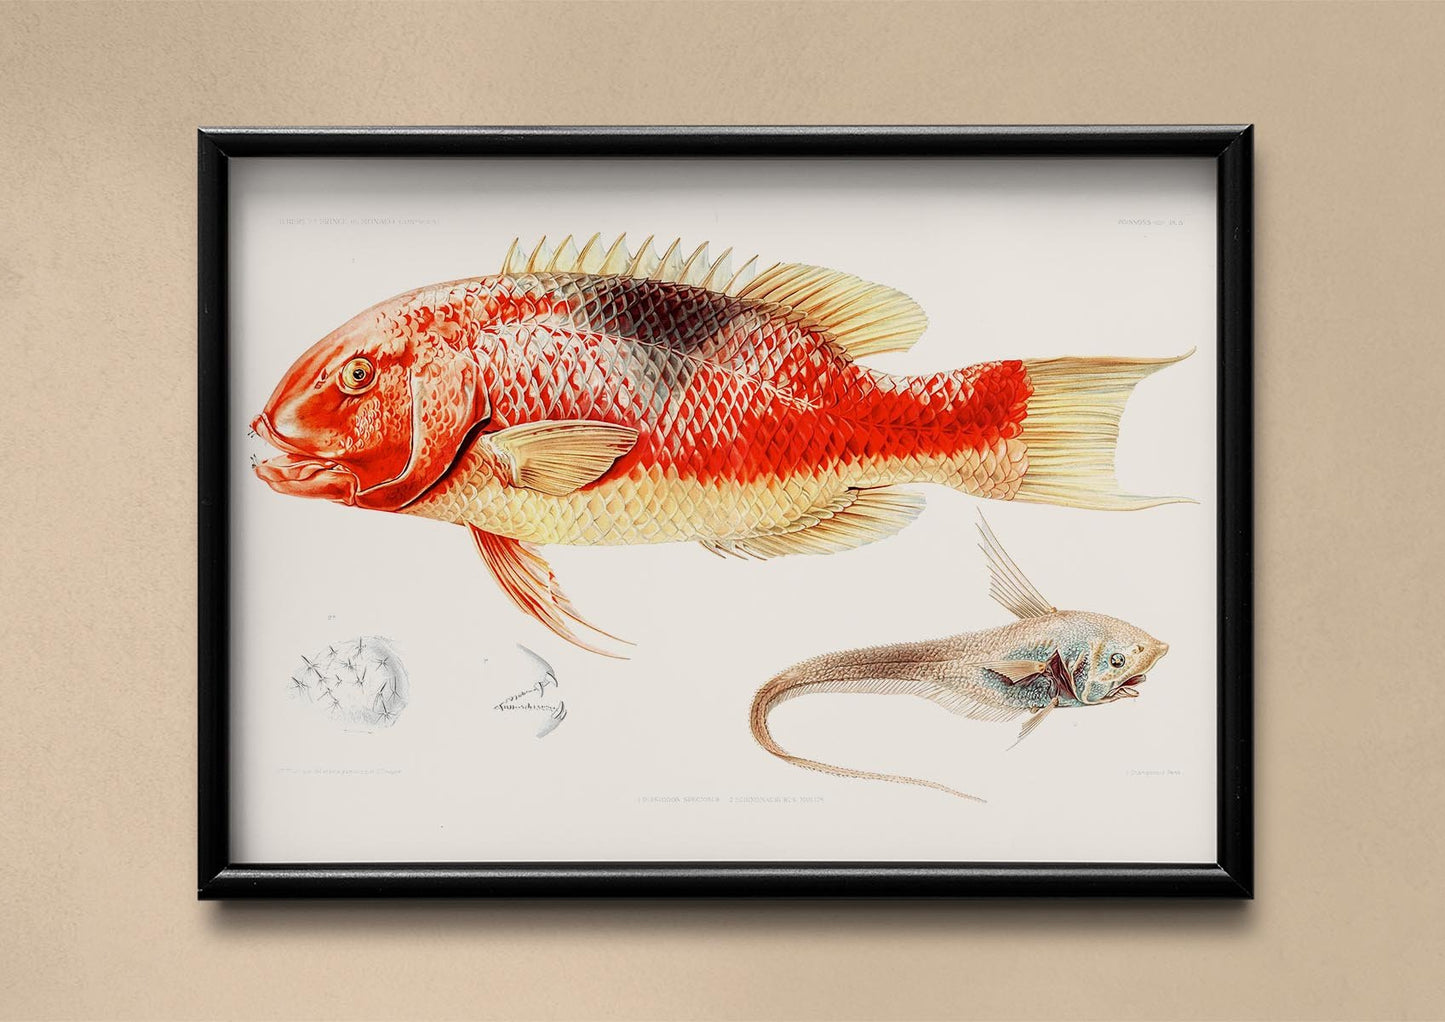 Hogfish and a Ray Finned Fish Poster